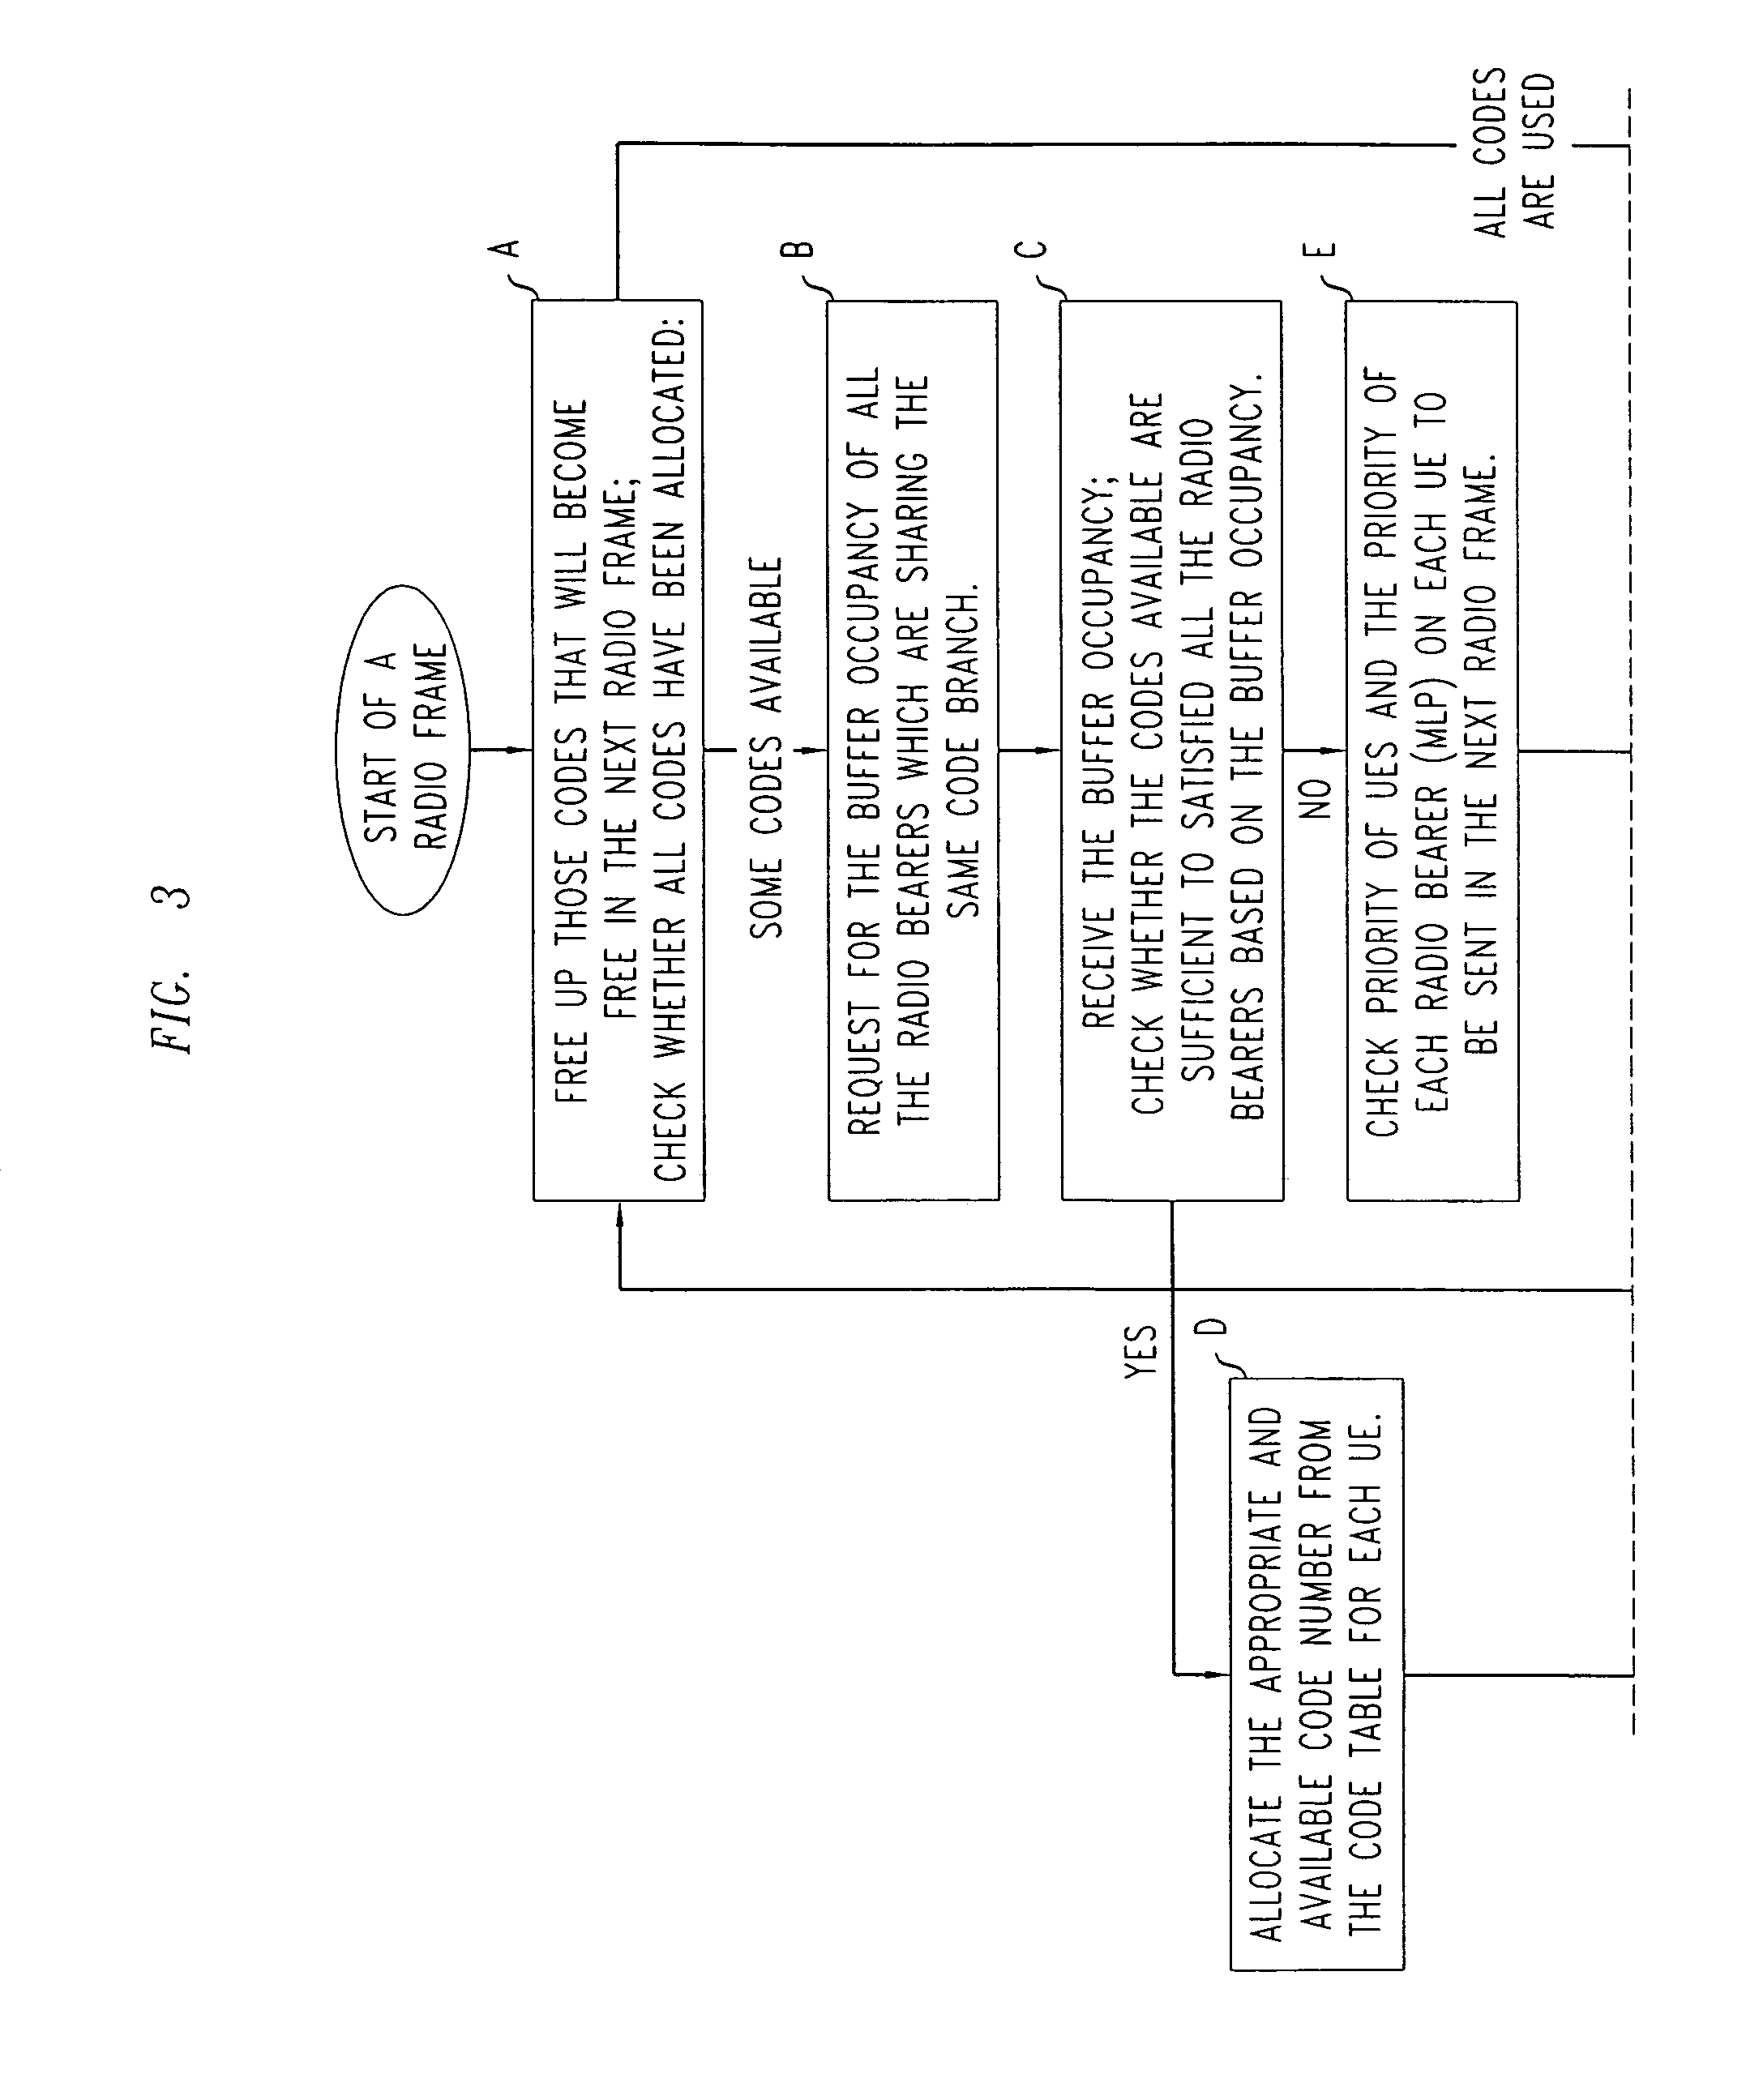 Method of allocating a channelisation code to one of a plurality of user terminals, a code division multiple access telecommunications network, and a CDMA telecommunications base station